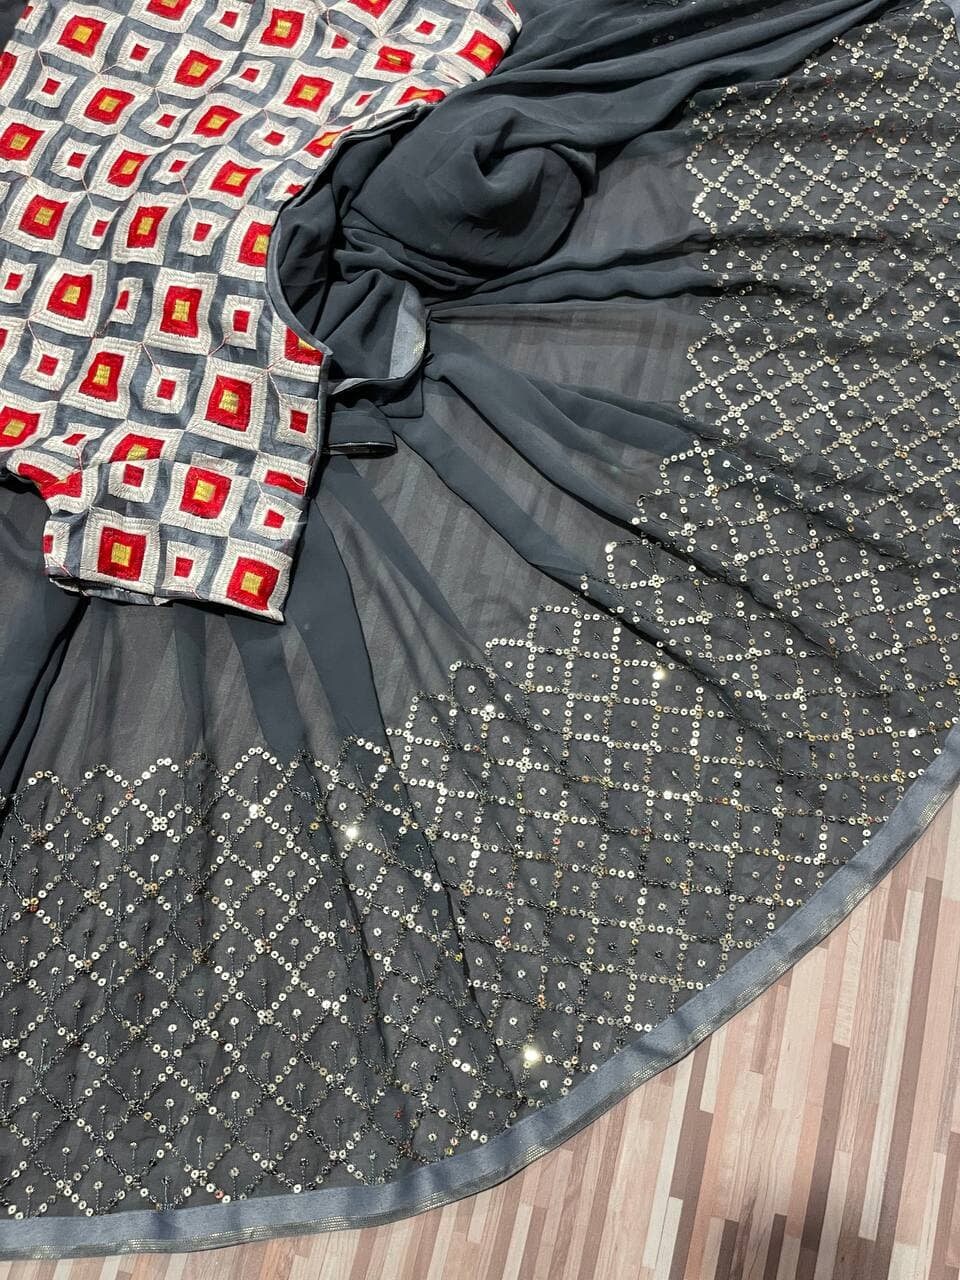 Katrina Kaif Gray Color Saree With Unstitched Blousedesigner | Etsy